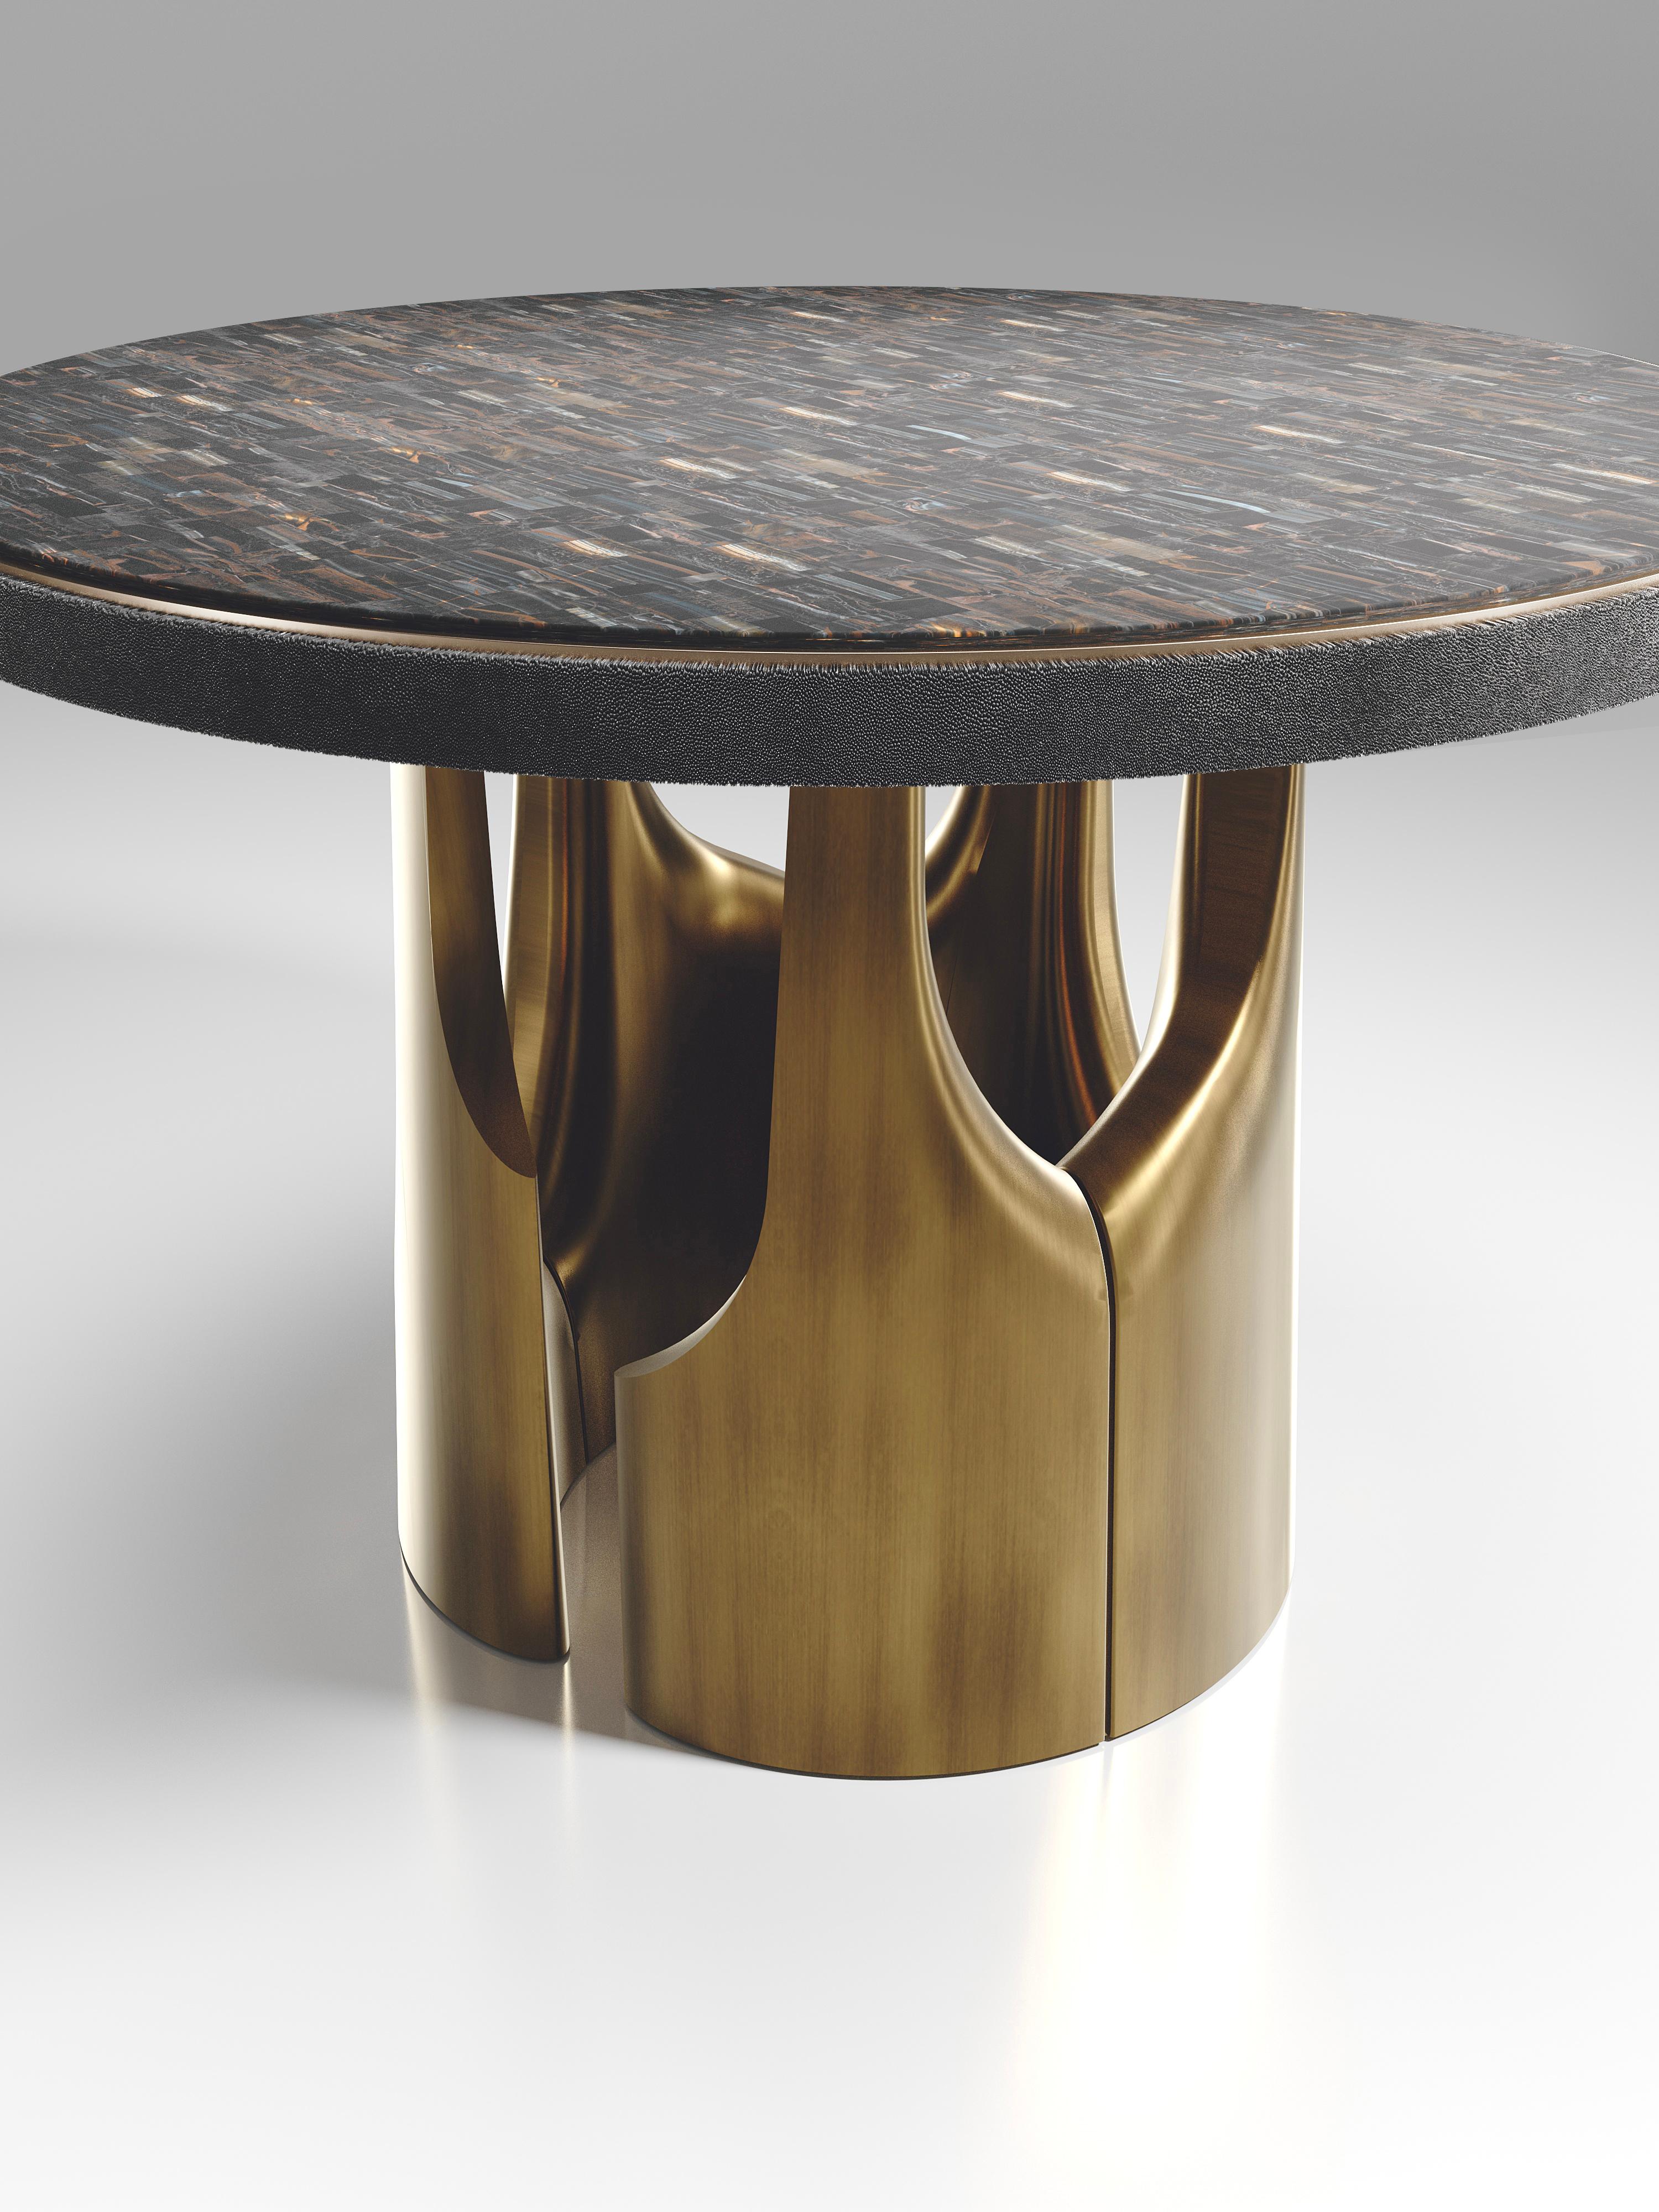 The triptych breakfast table by R&Y Augousti is a stunning multi-faceted sculptural piece. The beautiful hand craved details on the bronze-patina base demonstrate the incredible artisan work of Augousti. The top is in a tiger eye blue with a black